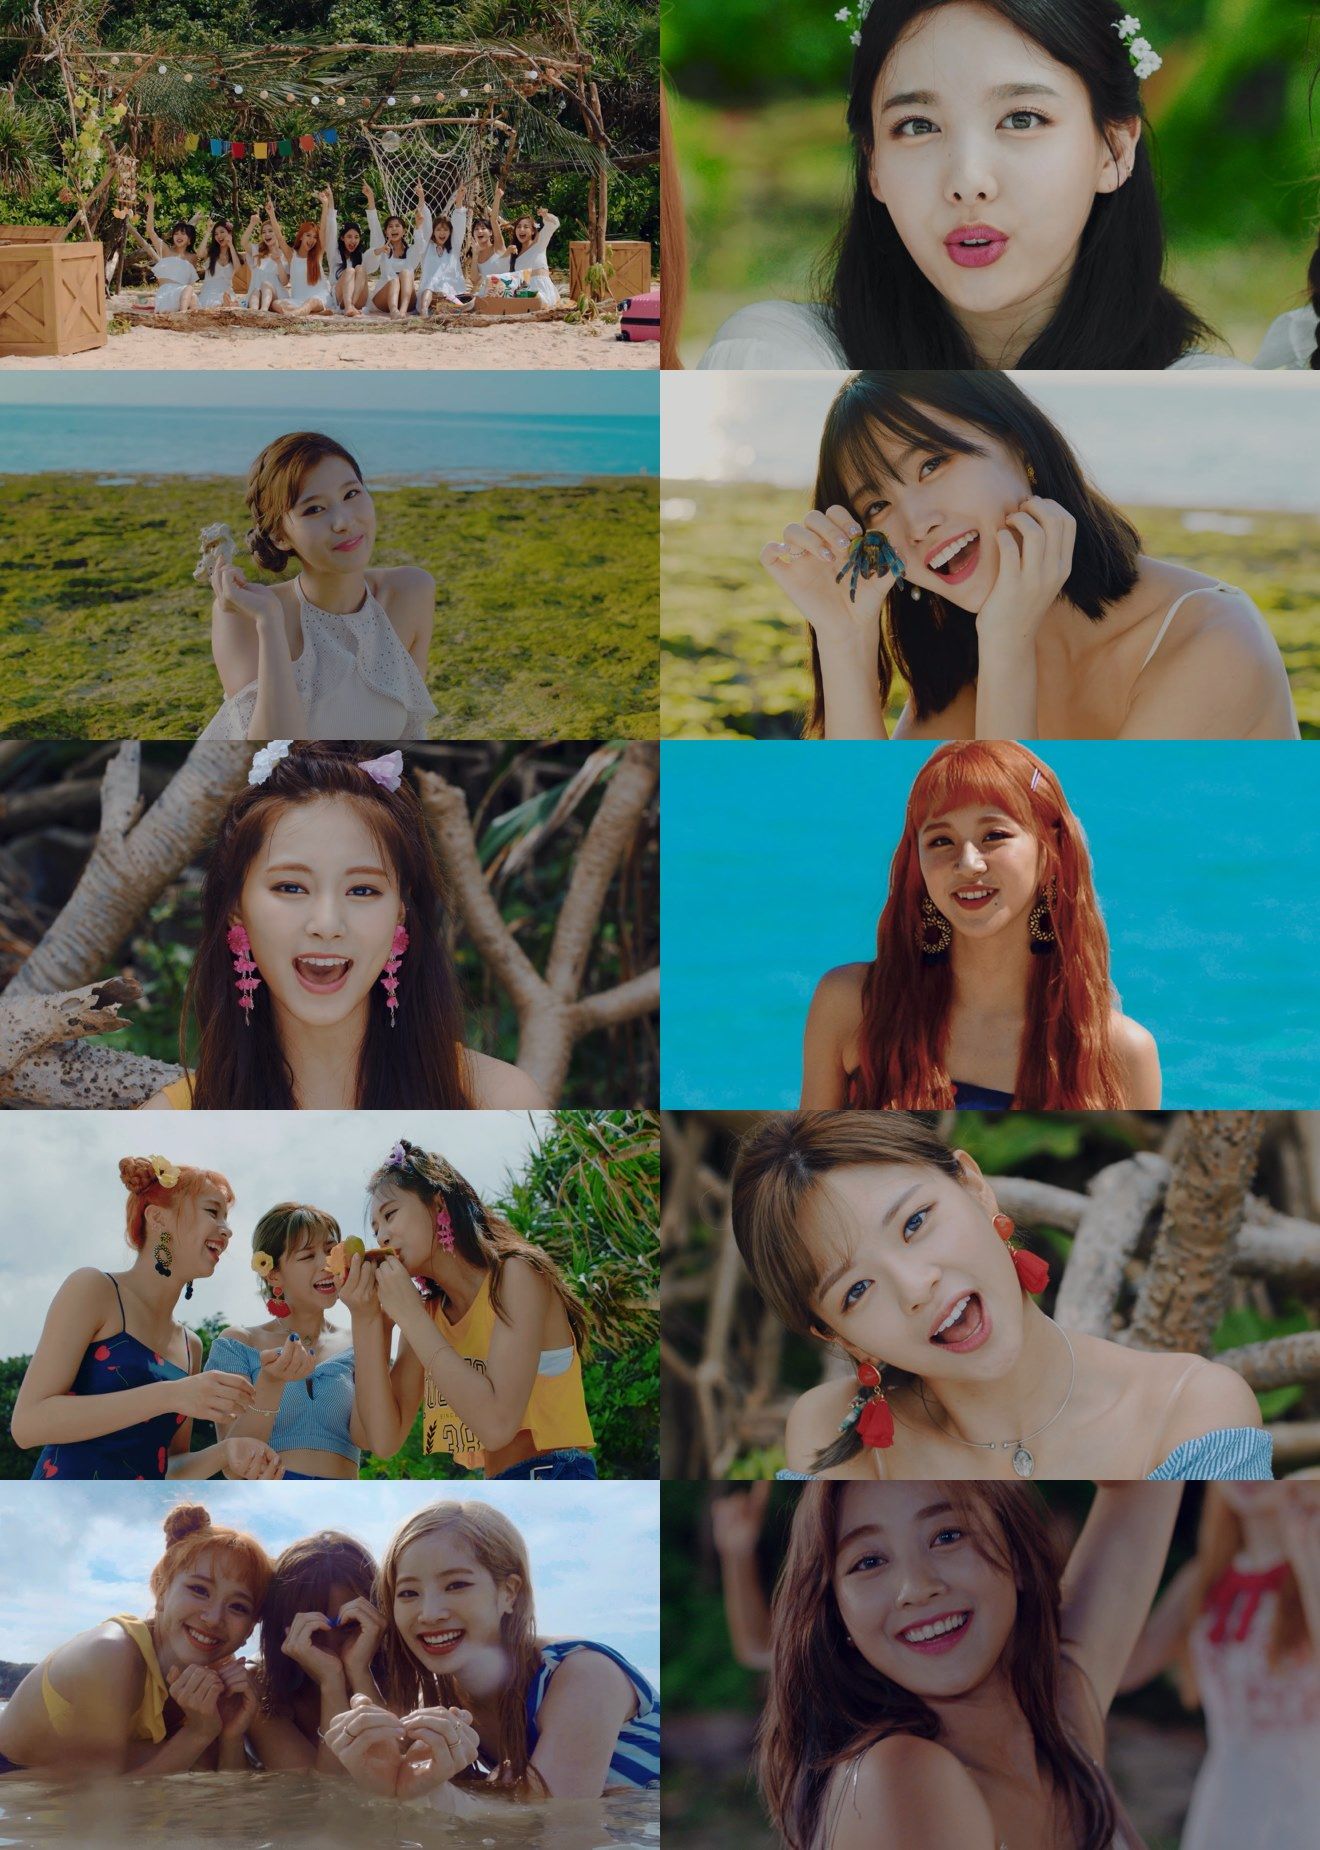 TWICE released its special album Summer Nightstand at 6 p.m. on the 9th and released the title song Dance the Nightstand Lee Jin-hyuk soundtrack and Music Video.This album is the second album after the special 1st album TWICE Coaster: Line 2 (TWICEcoaster: LANE 2), and the fifth mini album What Orange Is the New Black Love?(What is Love?) than the gods in three months after The album featured a total of nine tracks, including three new songs and six songs from What Orange Is the New Black Love.The new title song Dance The Night Away is an uptempo pop song expressing the youth of nine members who live with special happiness.Wheesung wrote a hit song with a senior singer, Yoonha Secret Number 486, Tiara Crazy Because of You and Ailee Haven.The lyrics, which remind me of a party that TWICE members gather together under the moonlight, are impressive: they doubled the cool Feelings, which are blowing heat in an atmosphere that blends with nature.At the same time, it captures the bright and healthy image of TWICE.You and me in the moonlight / Star Flower Festival Open Night/Springings and dancing with the sound of waves/This Feelings is really perfect!/ Play with us/Windows You come this way/With you and me and the world/With you all night long, yes, its good.Music Video, which starts with TWICE drifting, has the fun of taking various uninhabited lives of its members.We share coconut juice, enjoy swimming, and enjoy the beach volleyball. In the afternoon, we enjoy the campfire together and enjoy the pleasure of drifting on the uninhabited island.Music Video At the end of the game, TWICE members who appeared in tiredness were filled with cute charm.The middle-of-the-way dance attracts attention with its dynamic gestures, and it is impressive to see the difficult movement in cement digested on the sandy beach where the sun is shining.The ranks that are scattered in a row and then gathered in triangles make TWICEs dance more colorful.The album included additional new songs Chillex (CHILLAX) and Shot Thru the Heart.Among them, Shot Through the Heart attracted attention by participating in the first song by TWICE members Momo, Sana and Mina.It is a pop dance song that combines lyrics that express a frank mind toward a boy who does not care about himself.Chilex is impressive that it places a refreshing Feelings dance hall beat and uses the theme of instrument marimba with seasonal Feelings.I stop for a while and give an exciting rest to those who listen to the lyrics that express my desire to leave somewhere.TWICE will start comeback activities starting with TWICE Dance The Night Away SPECIAL V LIVE to commemorate the release of the new album through Naver V LIVE at 8 pm on the day.